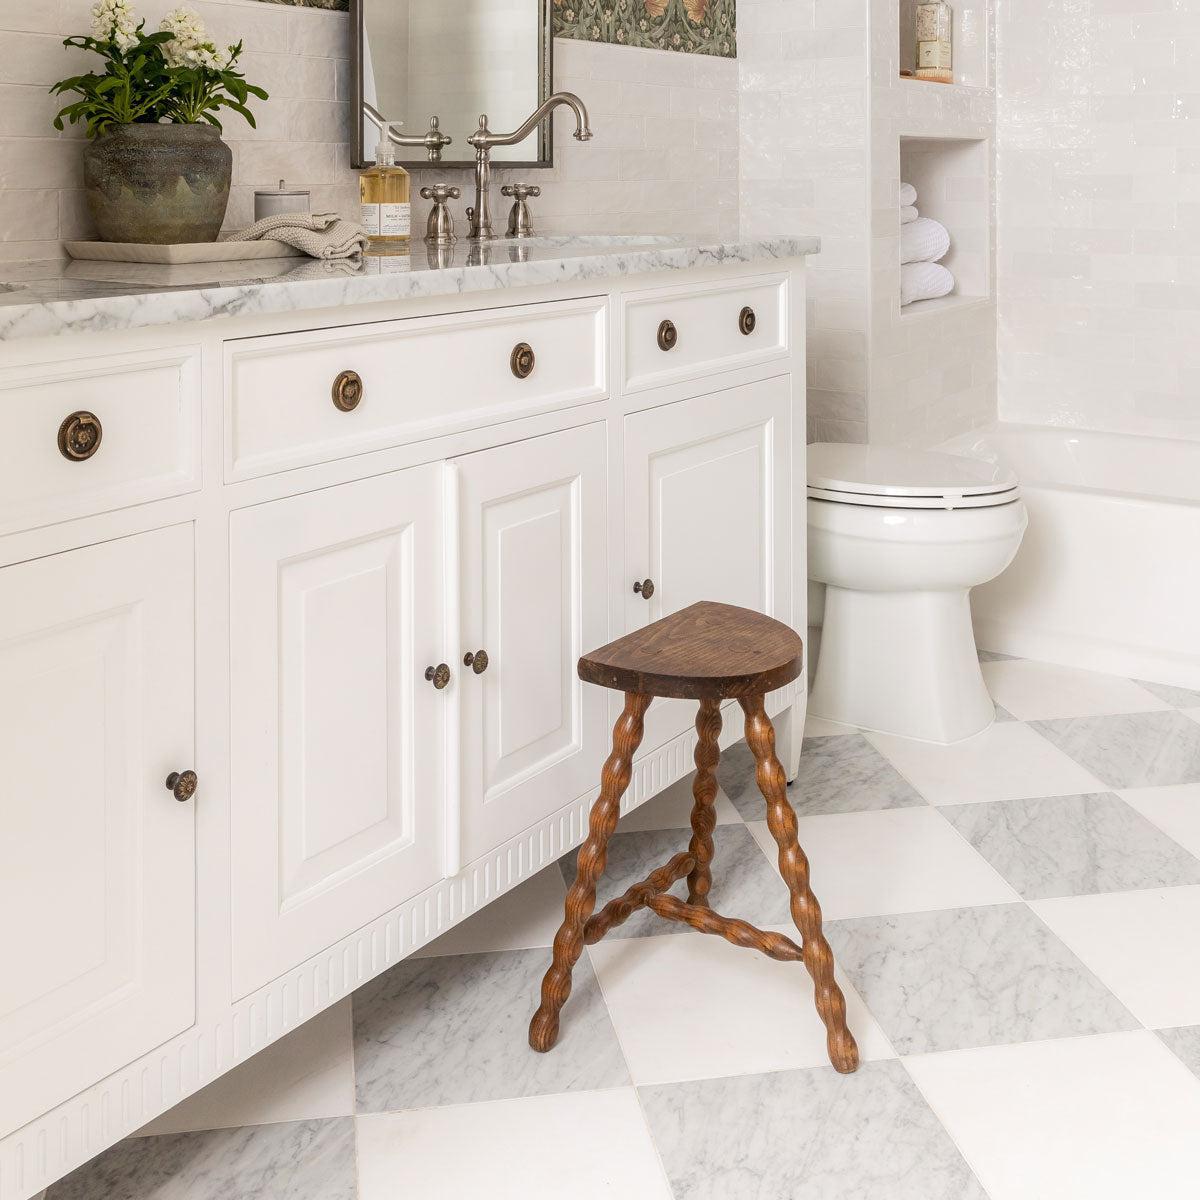 Carrara marble sqaures in a white and gray checkerboard pattern bathroom floor